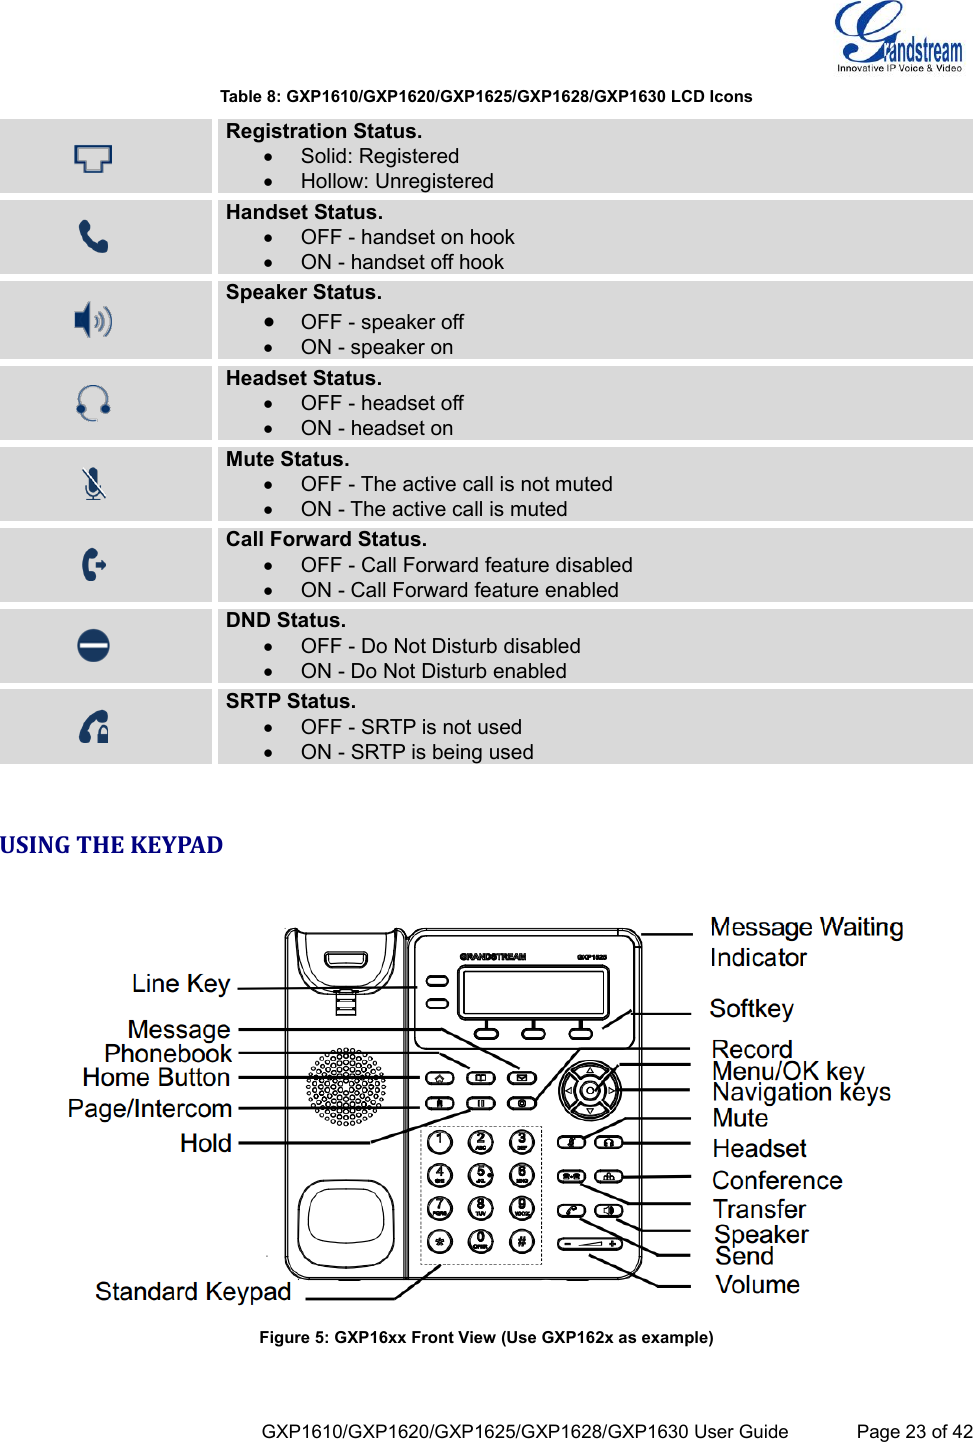  GXP1610/GXP1620/GXP1625/GXP1628/GXP1630 User Guide             Page 23 of 42 Table 8: GXP1610/GXP1620/GXP1625/GXP1628/GXP1630 LCD Icons  Registration Status.  Solid: Registered  Hollow: Unregistered  Handset Status.  OFF - handset on hook                                  ON - handset off hook  Speaker Status.  OFF - speaker off                                 ON - speaker on  Headset Status.  OFF - headset off  ON - headset on  Mute Status.  OFF - The active call is not muted  ON - The active call is muted  Call Forward Status.  OFF - Call Forward feature disabled  ON - Call Forward feature enabled  DND Status.  OFF - Do Not Disturb disabled  ON - Do Not Disturb enabled  SRTP Status.  OFF - SRTP is not used  ON - SRTP is being used  USING THE KEYPAD   Figure 5: GXP16xx Front View (Use GXP162x as example)   